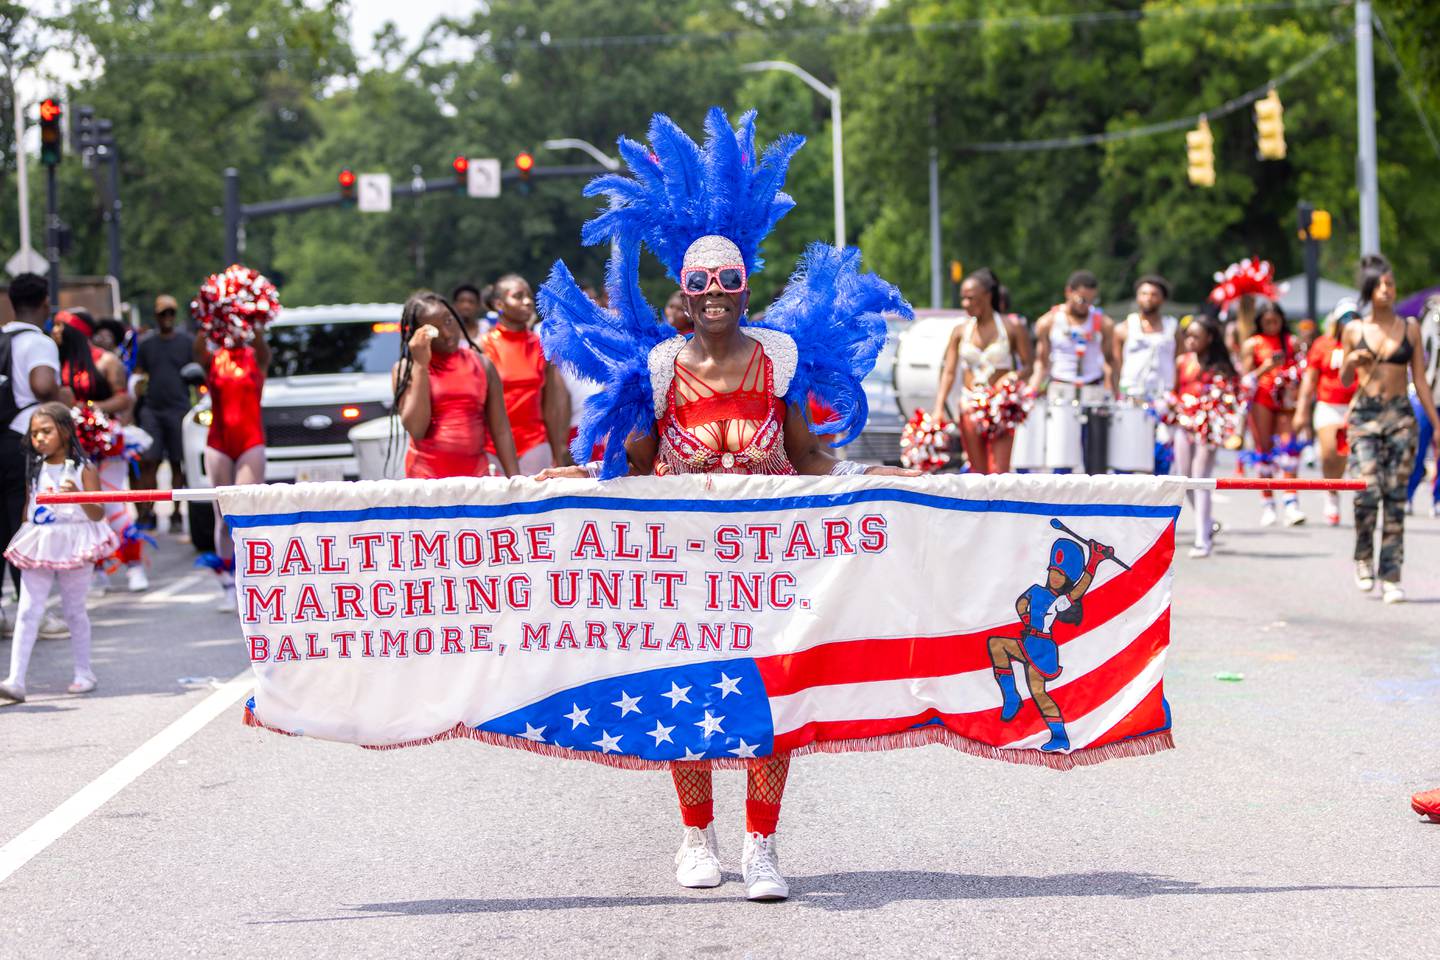 Baltimore All-Stars Marching Unit Inc. leader marching during the annual Baltimore Washington ONE Carnival in Baltimore, MD on Saturday, July 8, 2023.